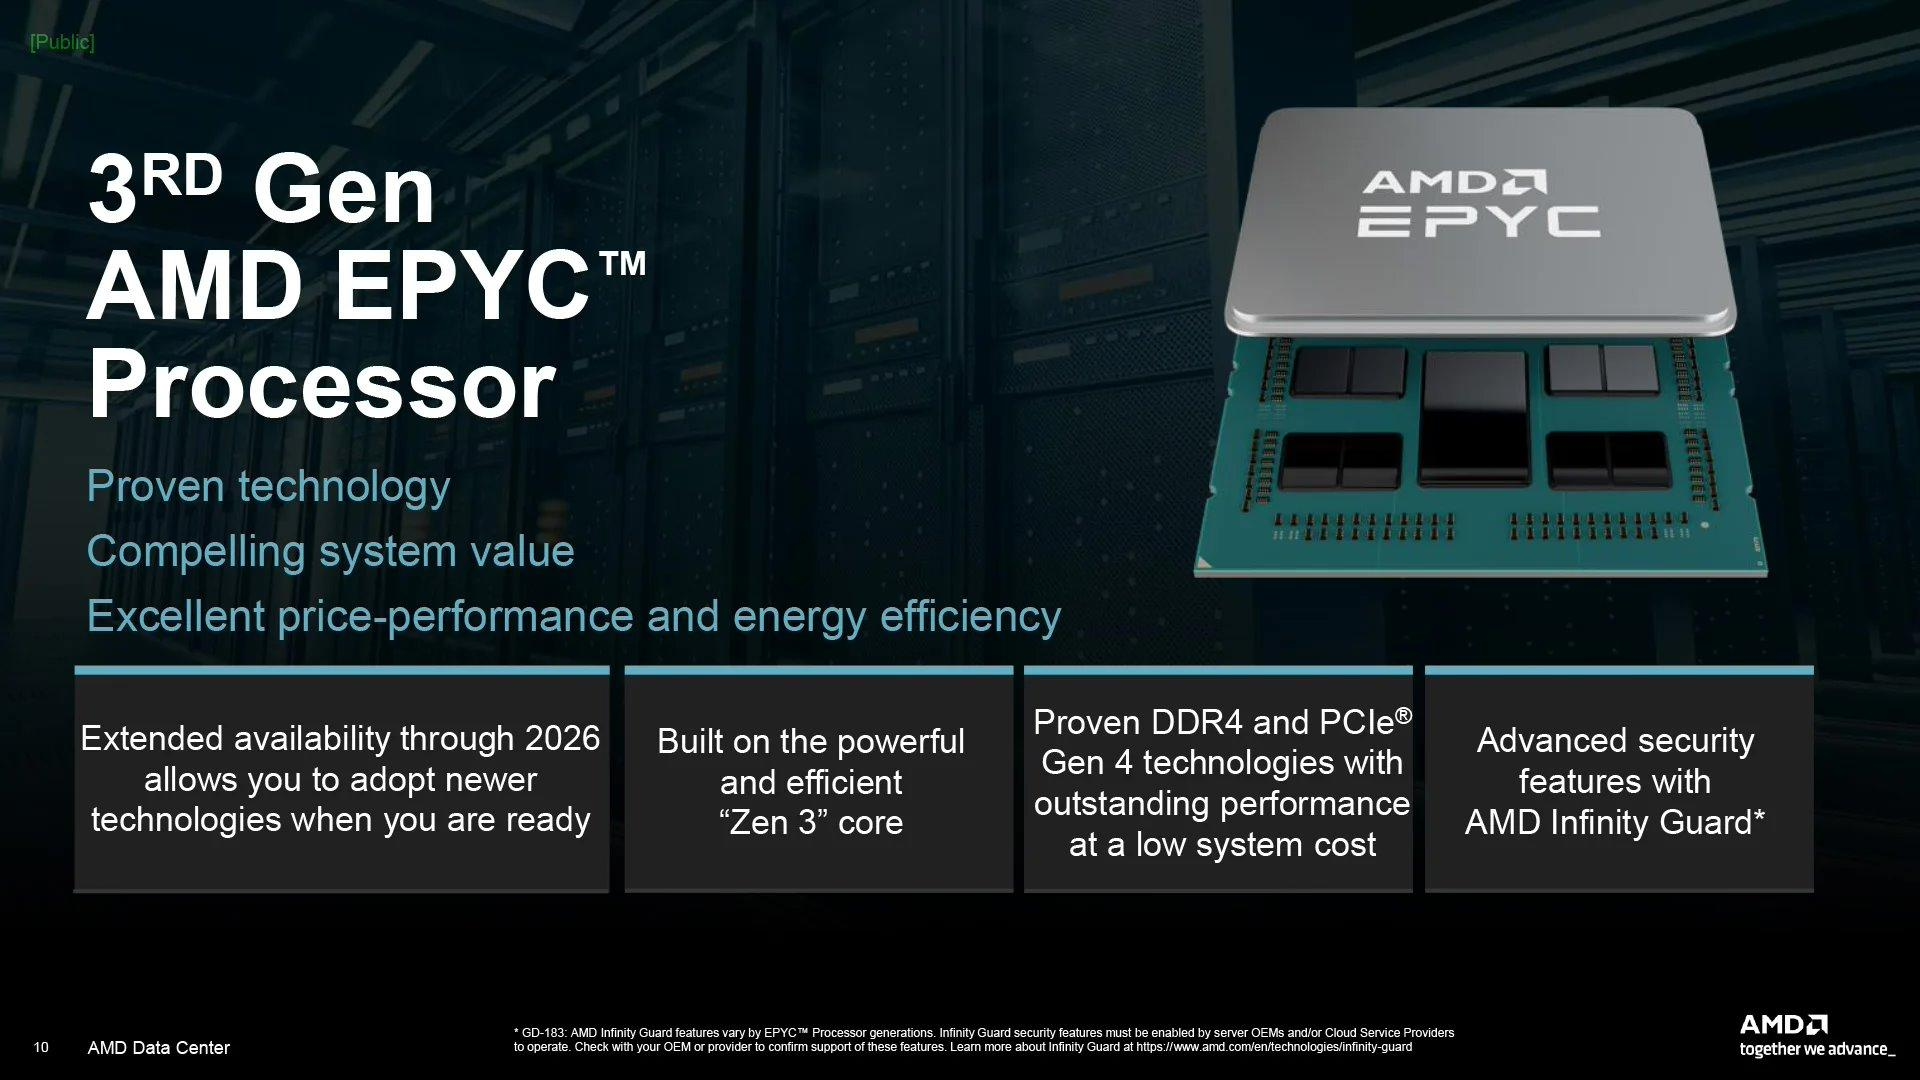 Committed to supporting AMD's expansion of the EPYC 7003 